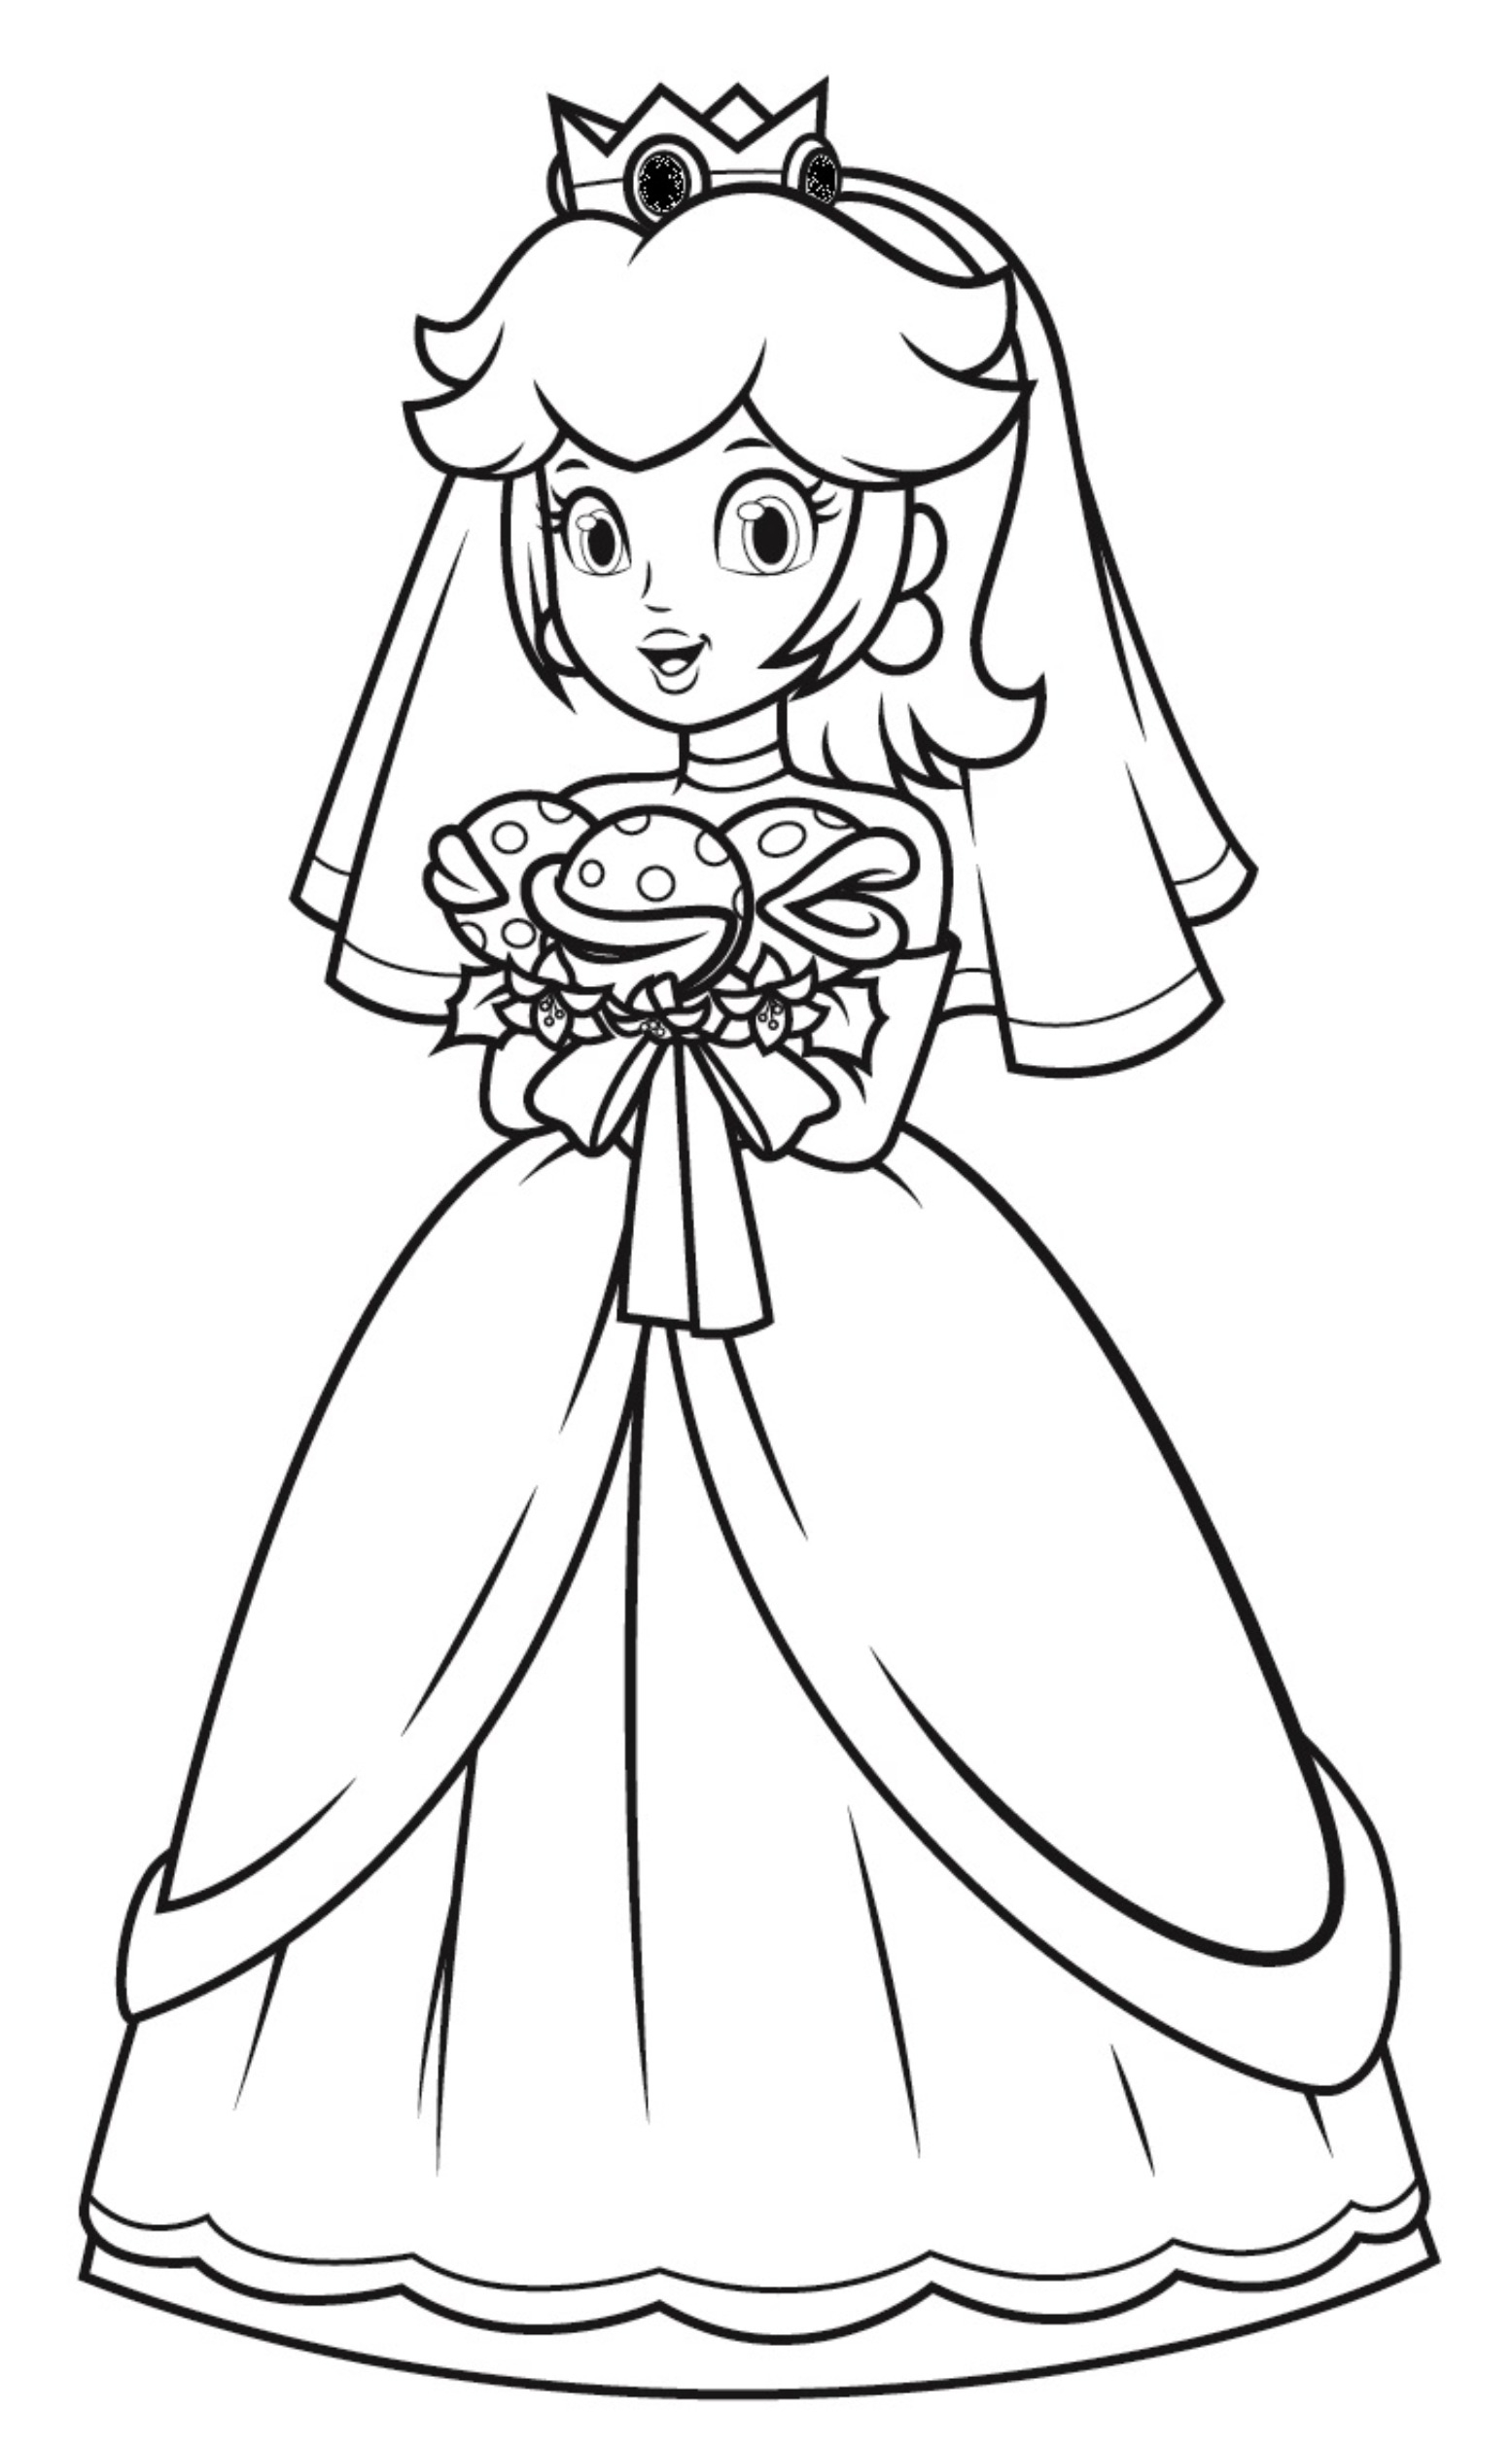 Princess Peach Coloring Pages For Girls Coloring Pages